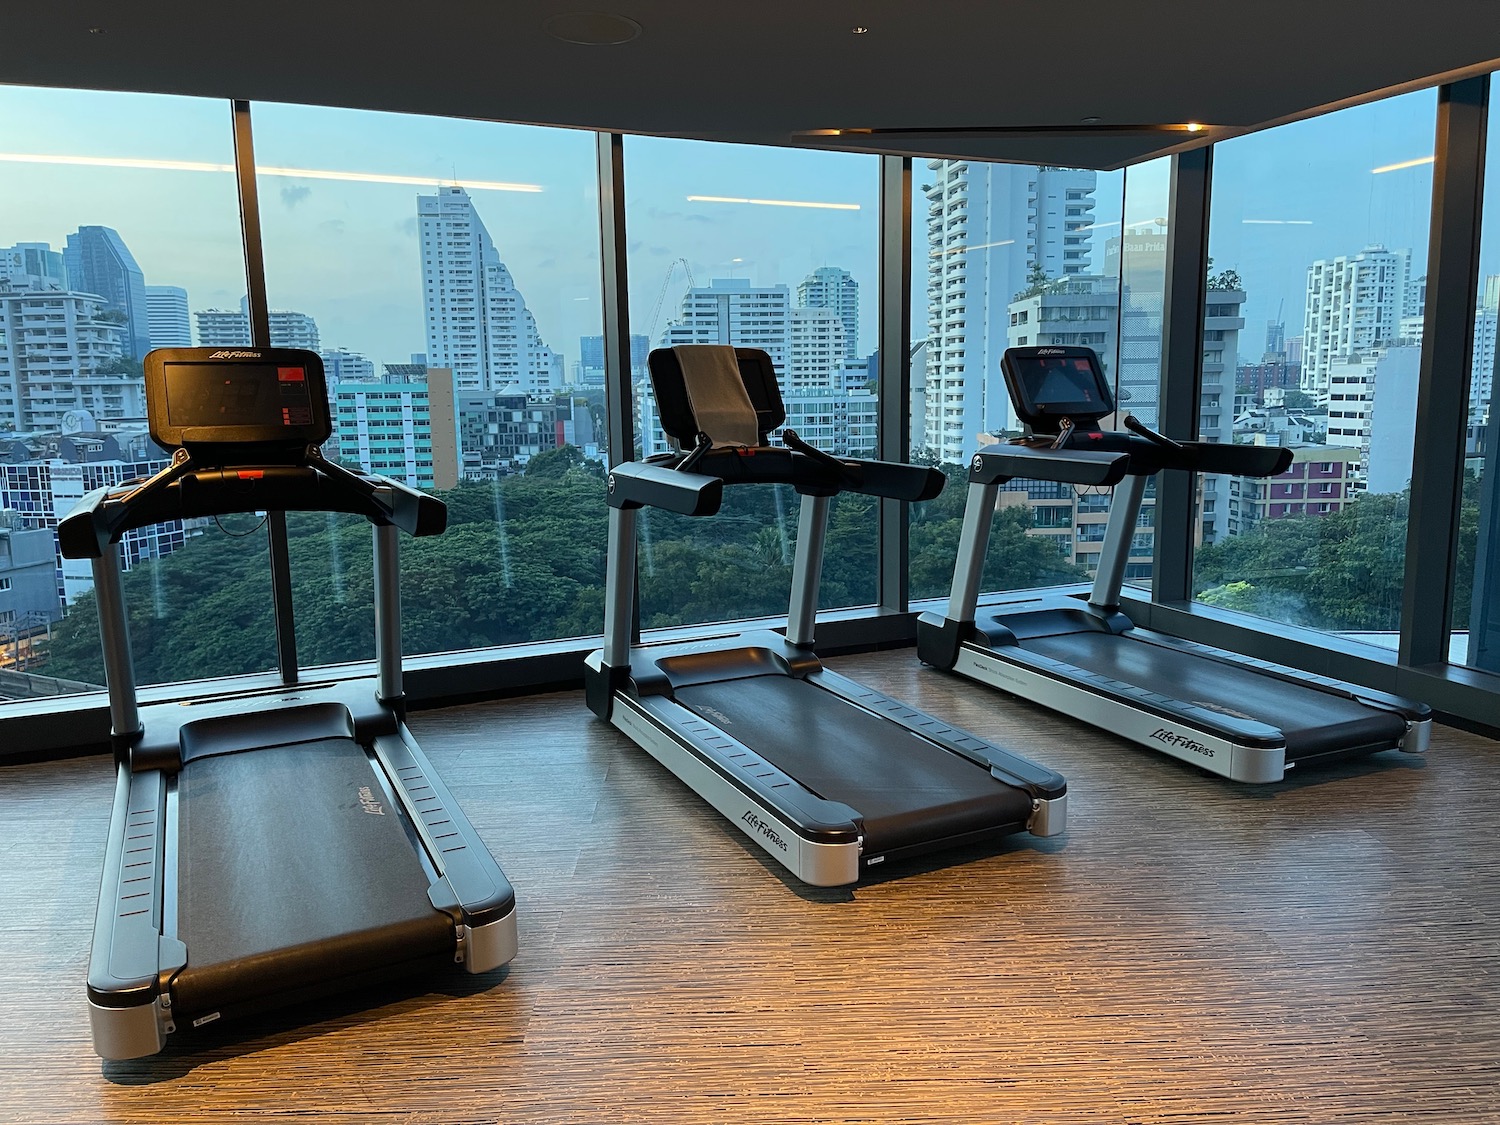 a group of treadmills in a room with a large window